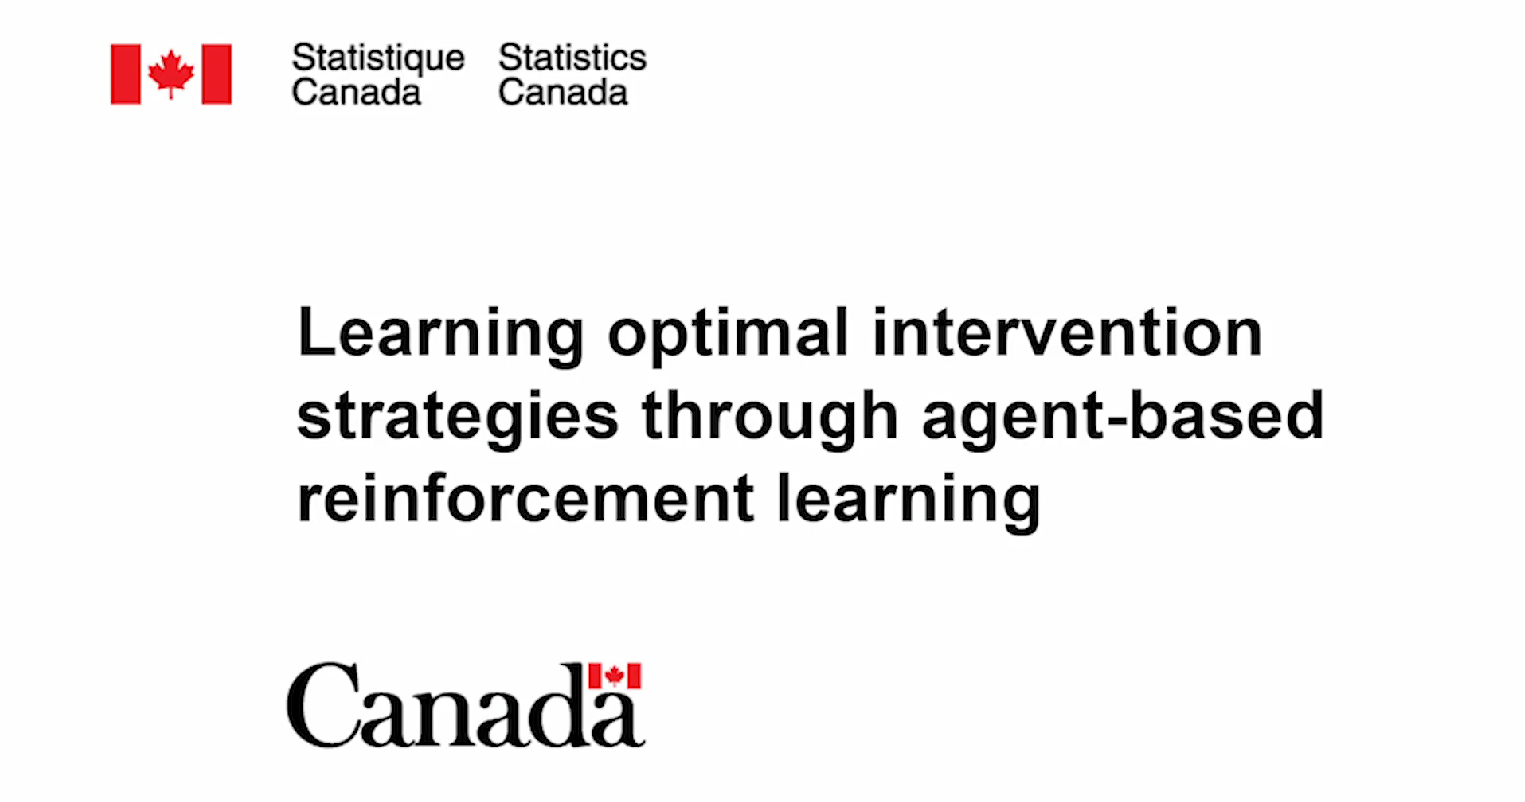 Learning optimal intervention strategies through agent-based reinforcement learning